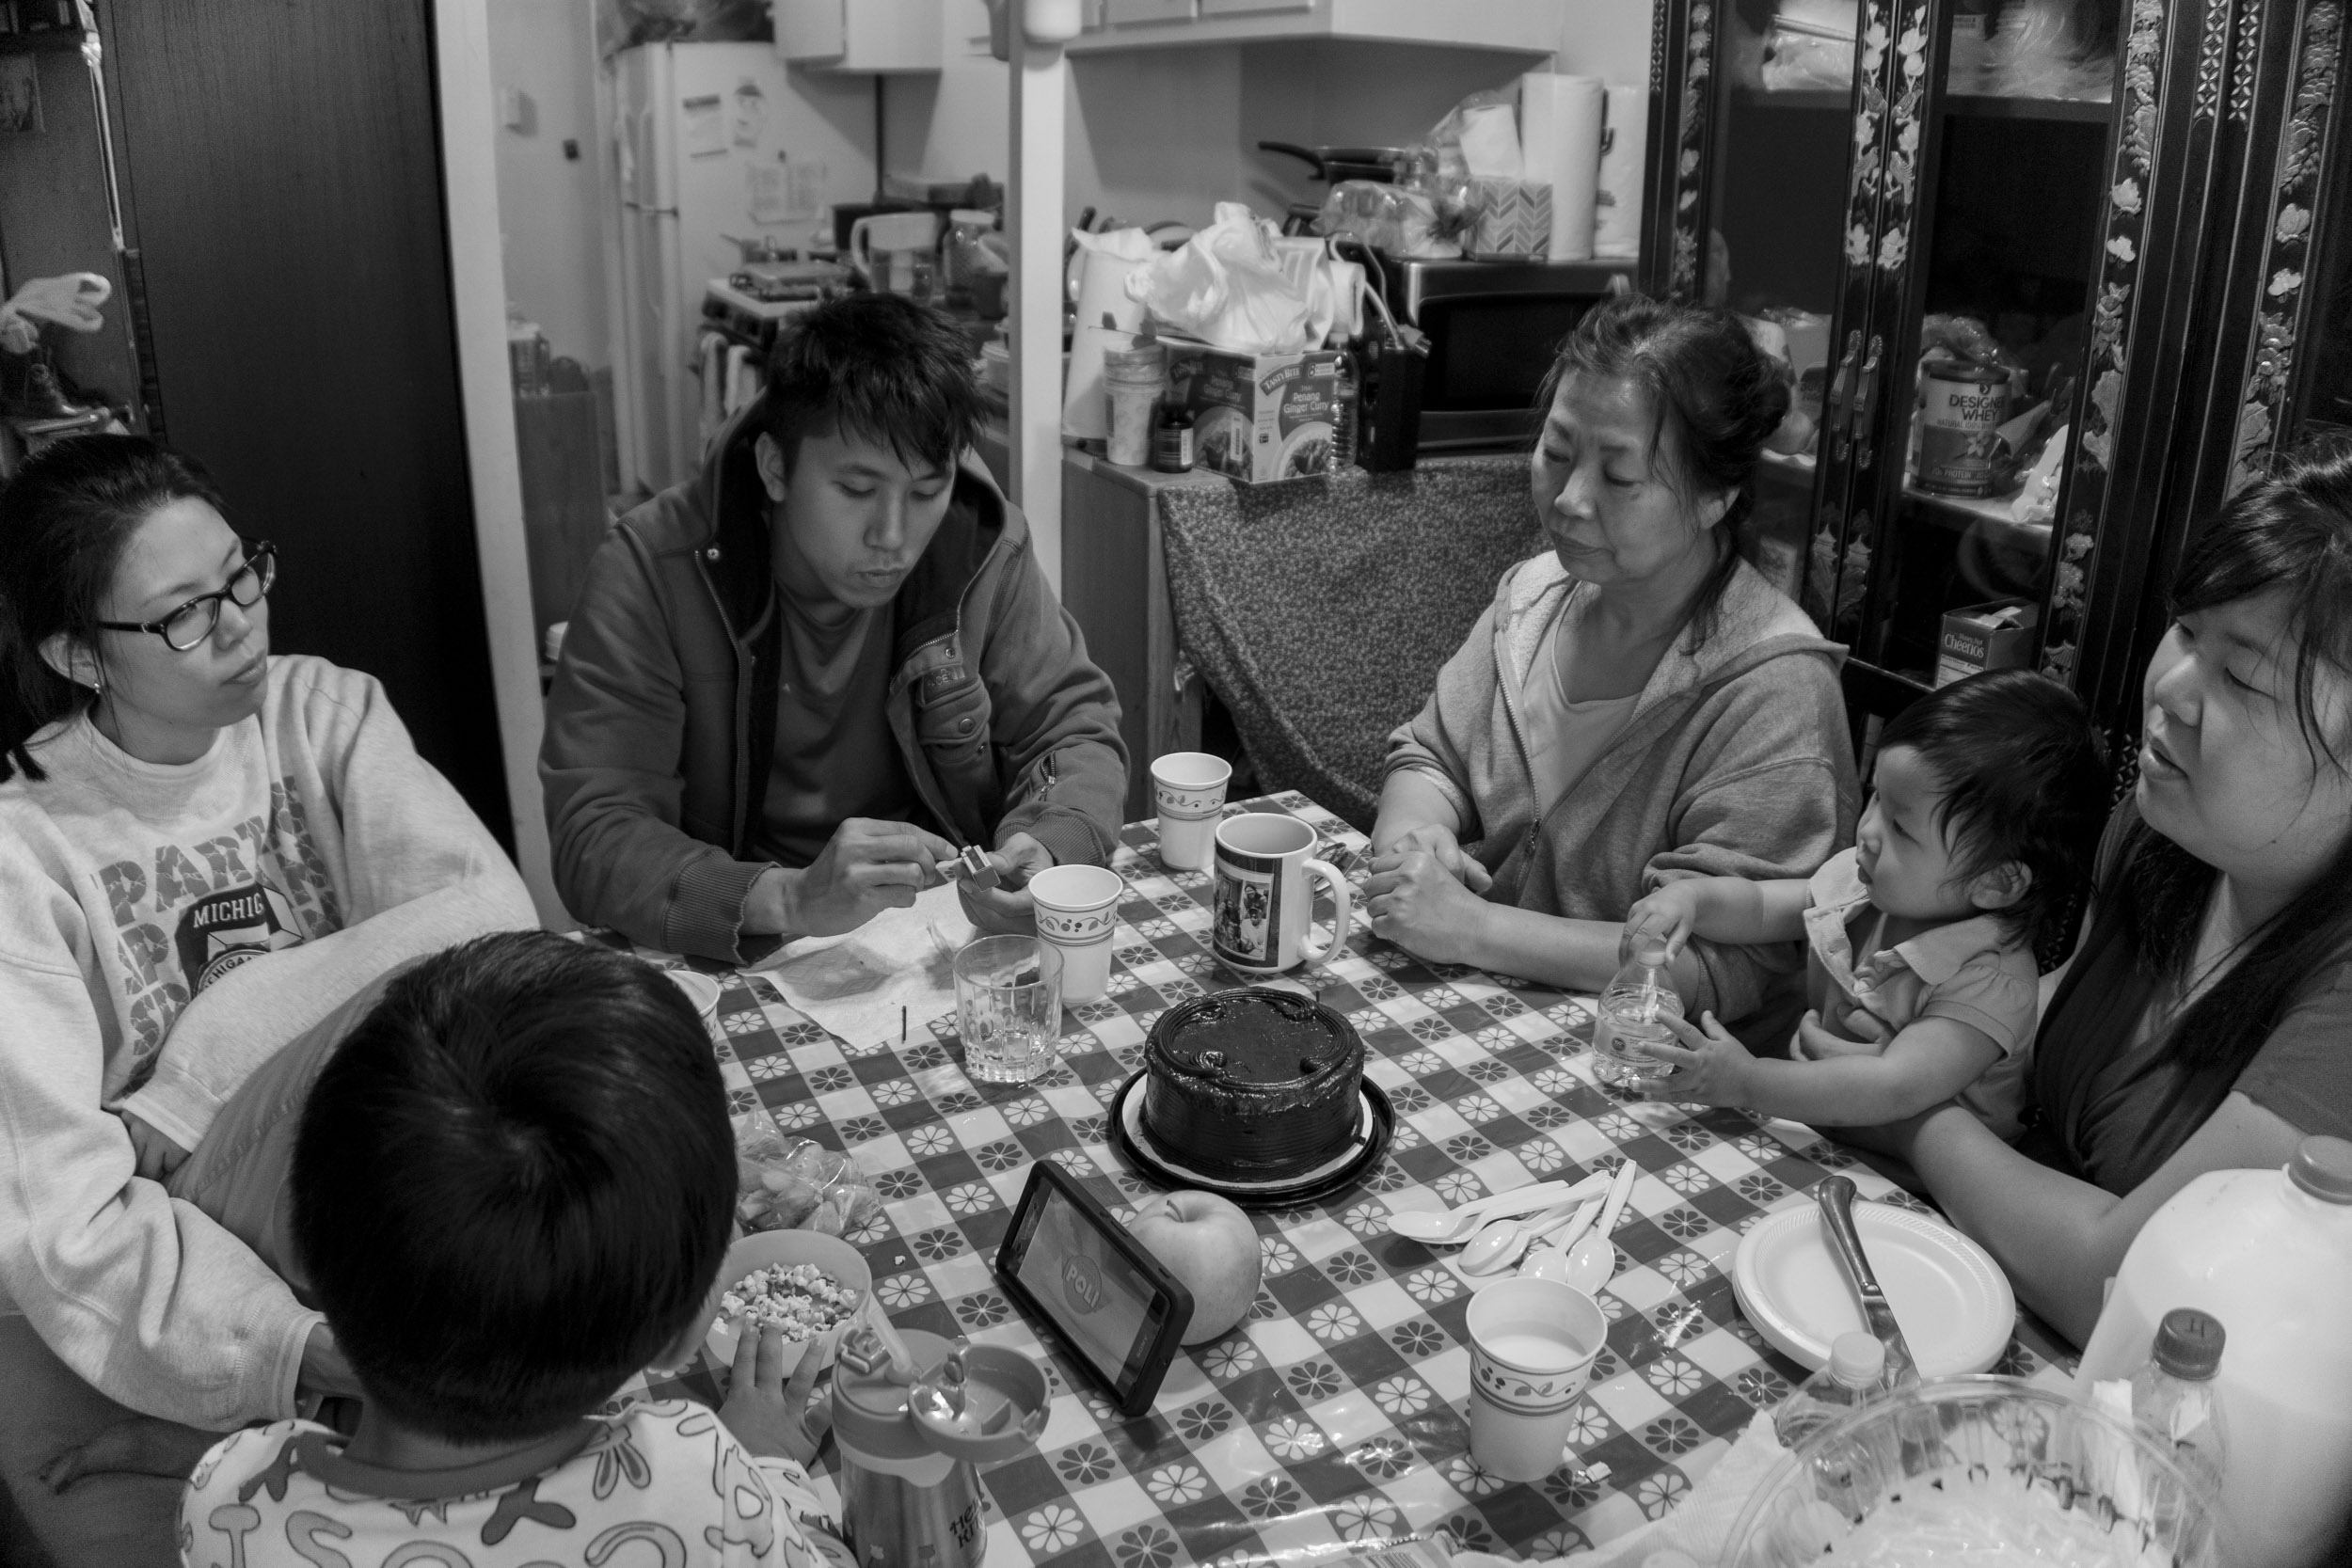  The Kim family returns home from a long day that ended with the burial of the family patriarch Chinsoo Kim, who died on 9/14/17 after a yearlong battle with lung cancer. They sit at the dining table with a small cake to lighten the mood and share me